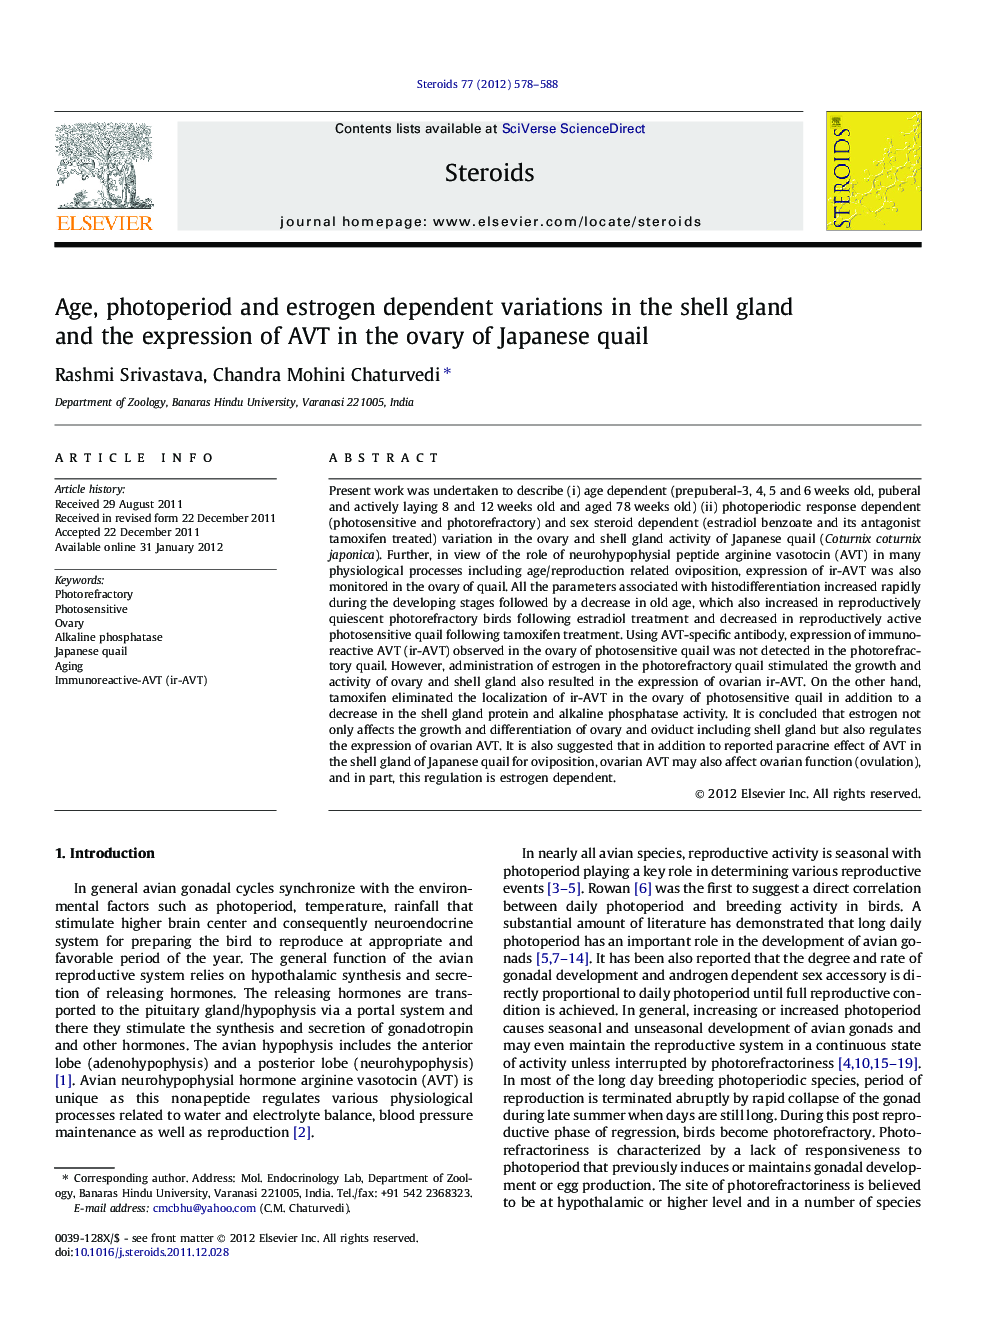 Age, photoperiod and estrogen dependent variations in the shell gland and the expression of AVT in the ovary of Japanese quail